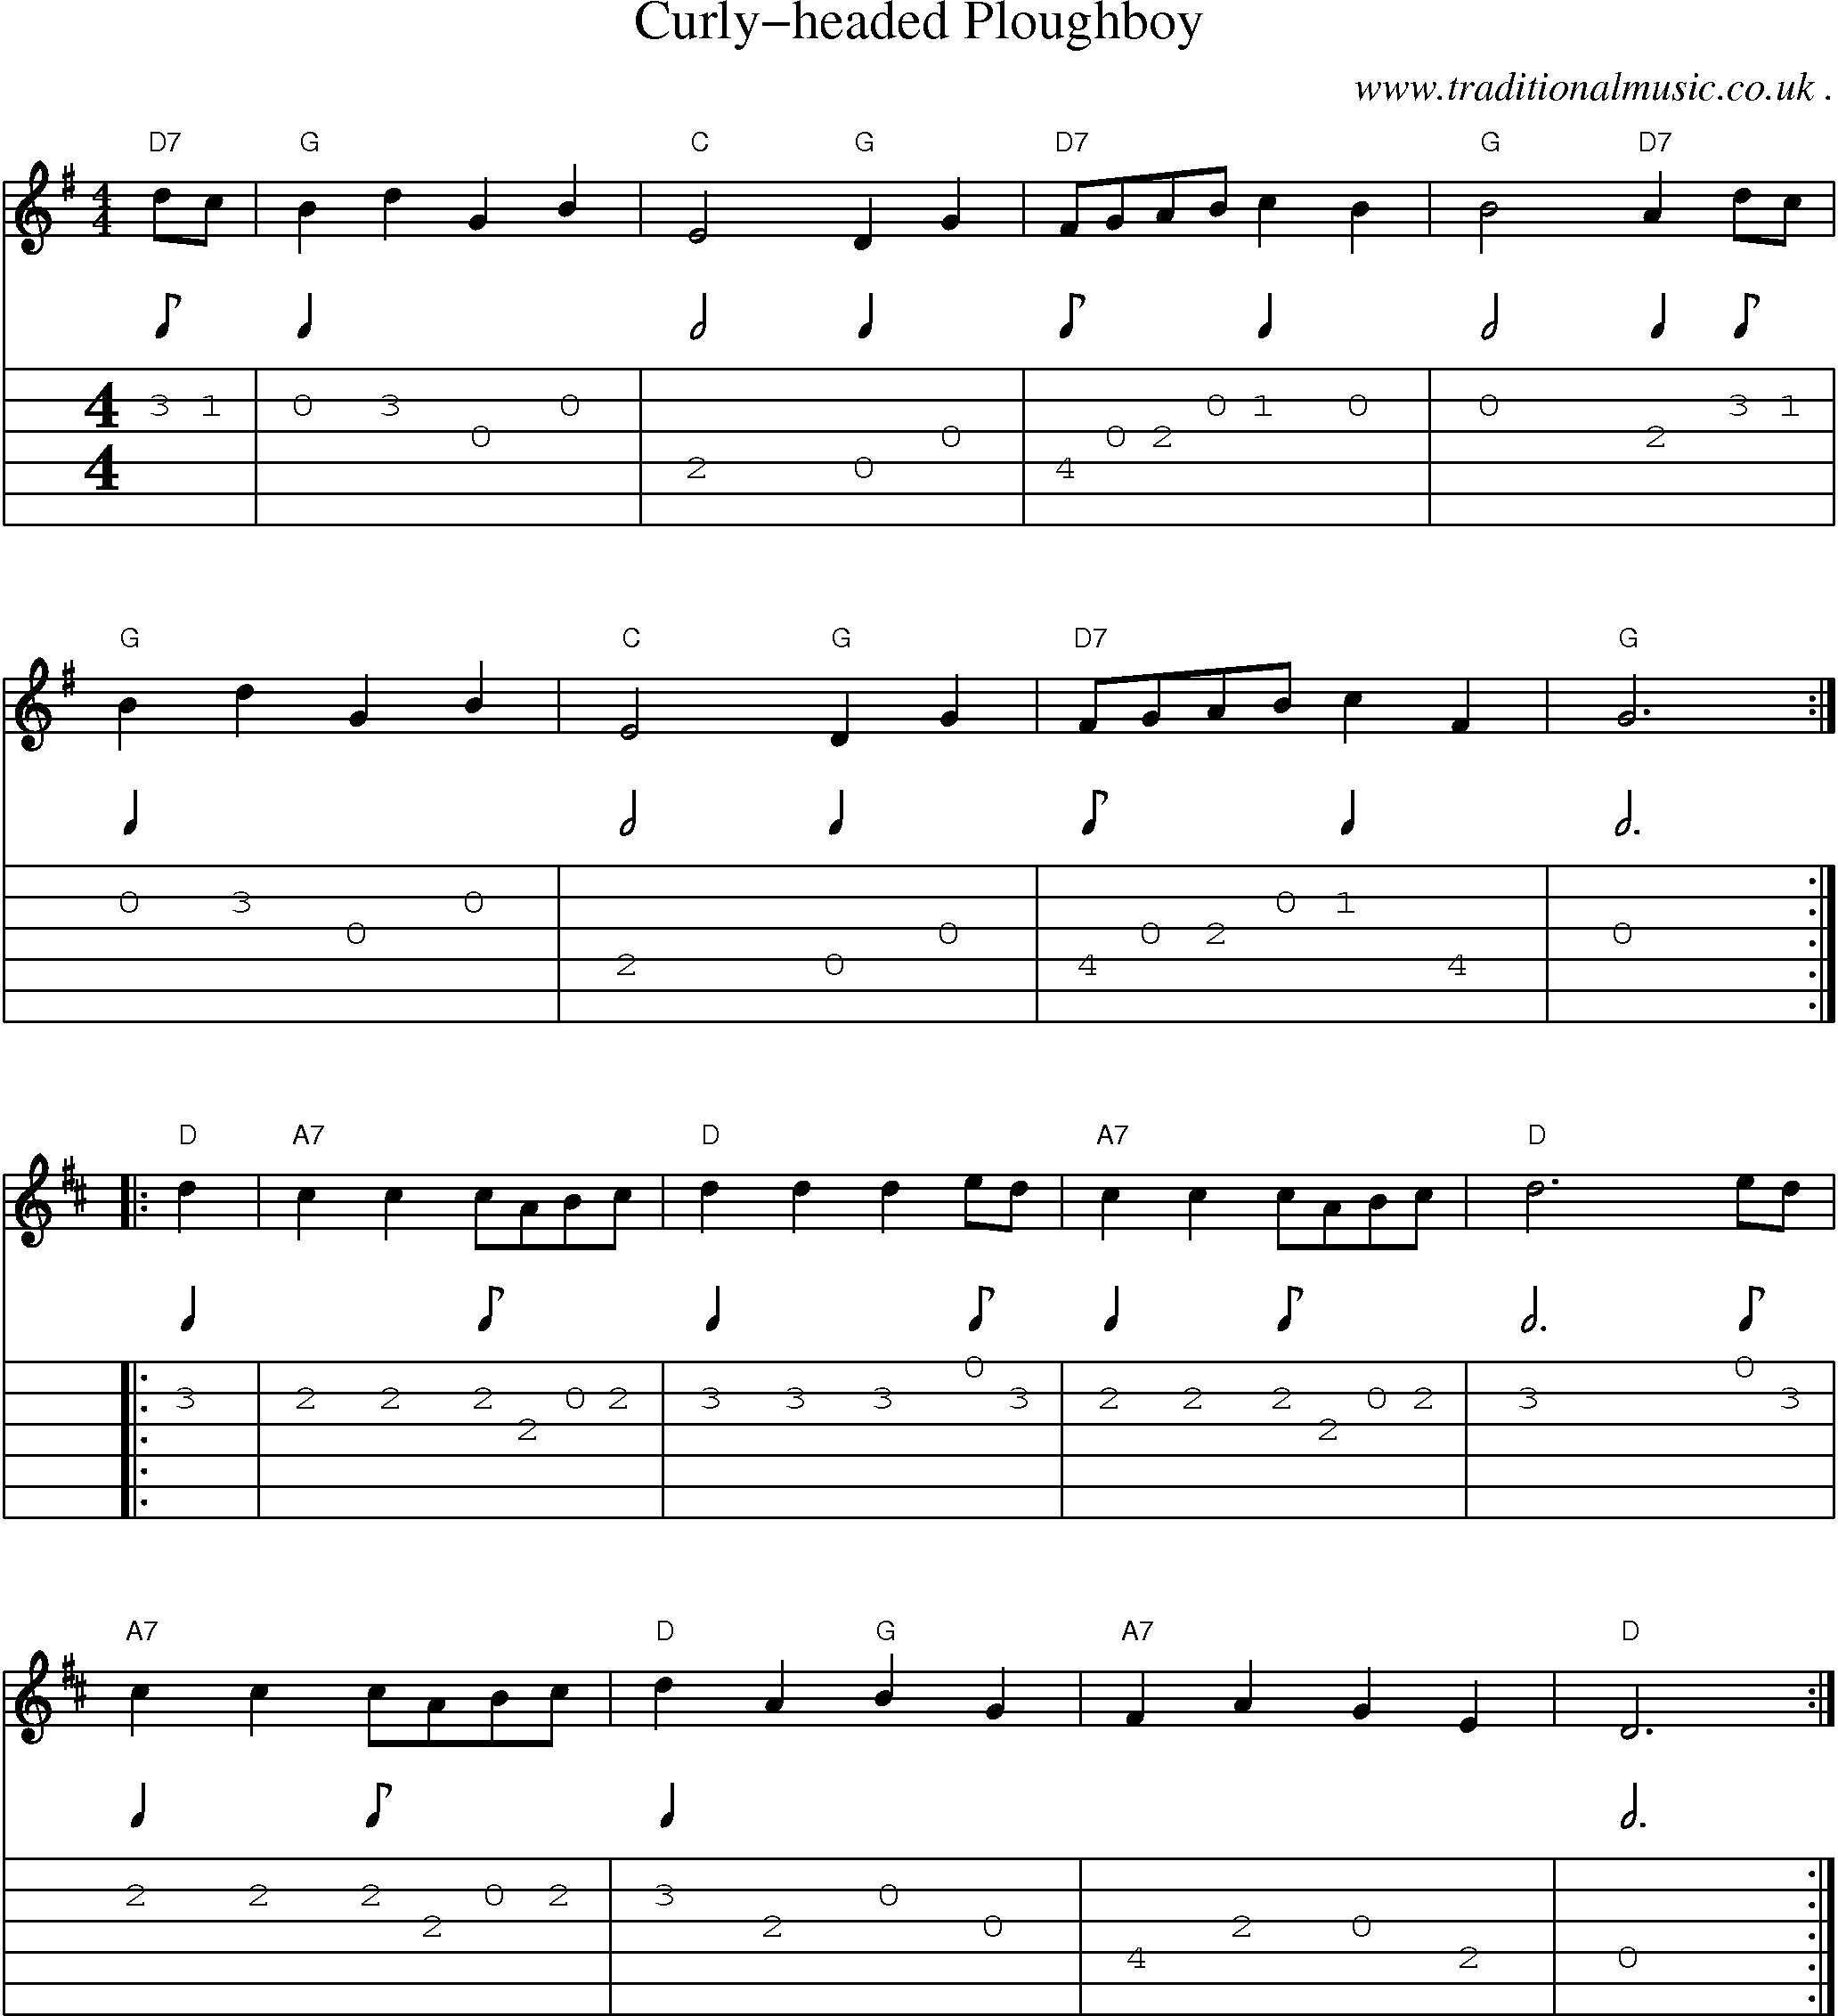 Sheet-Music and Guitar Tabs for Curly-headed Ploughboy